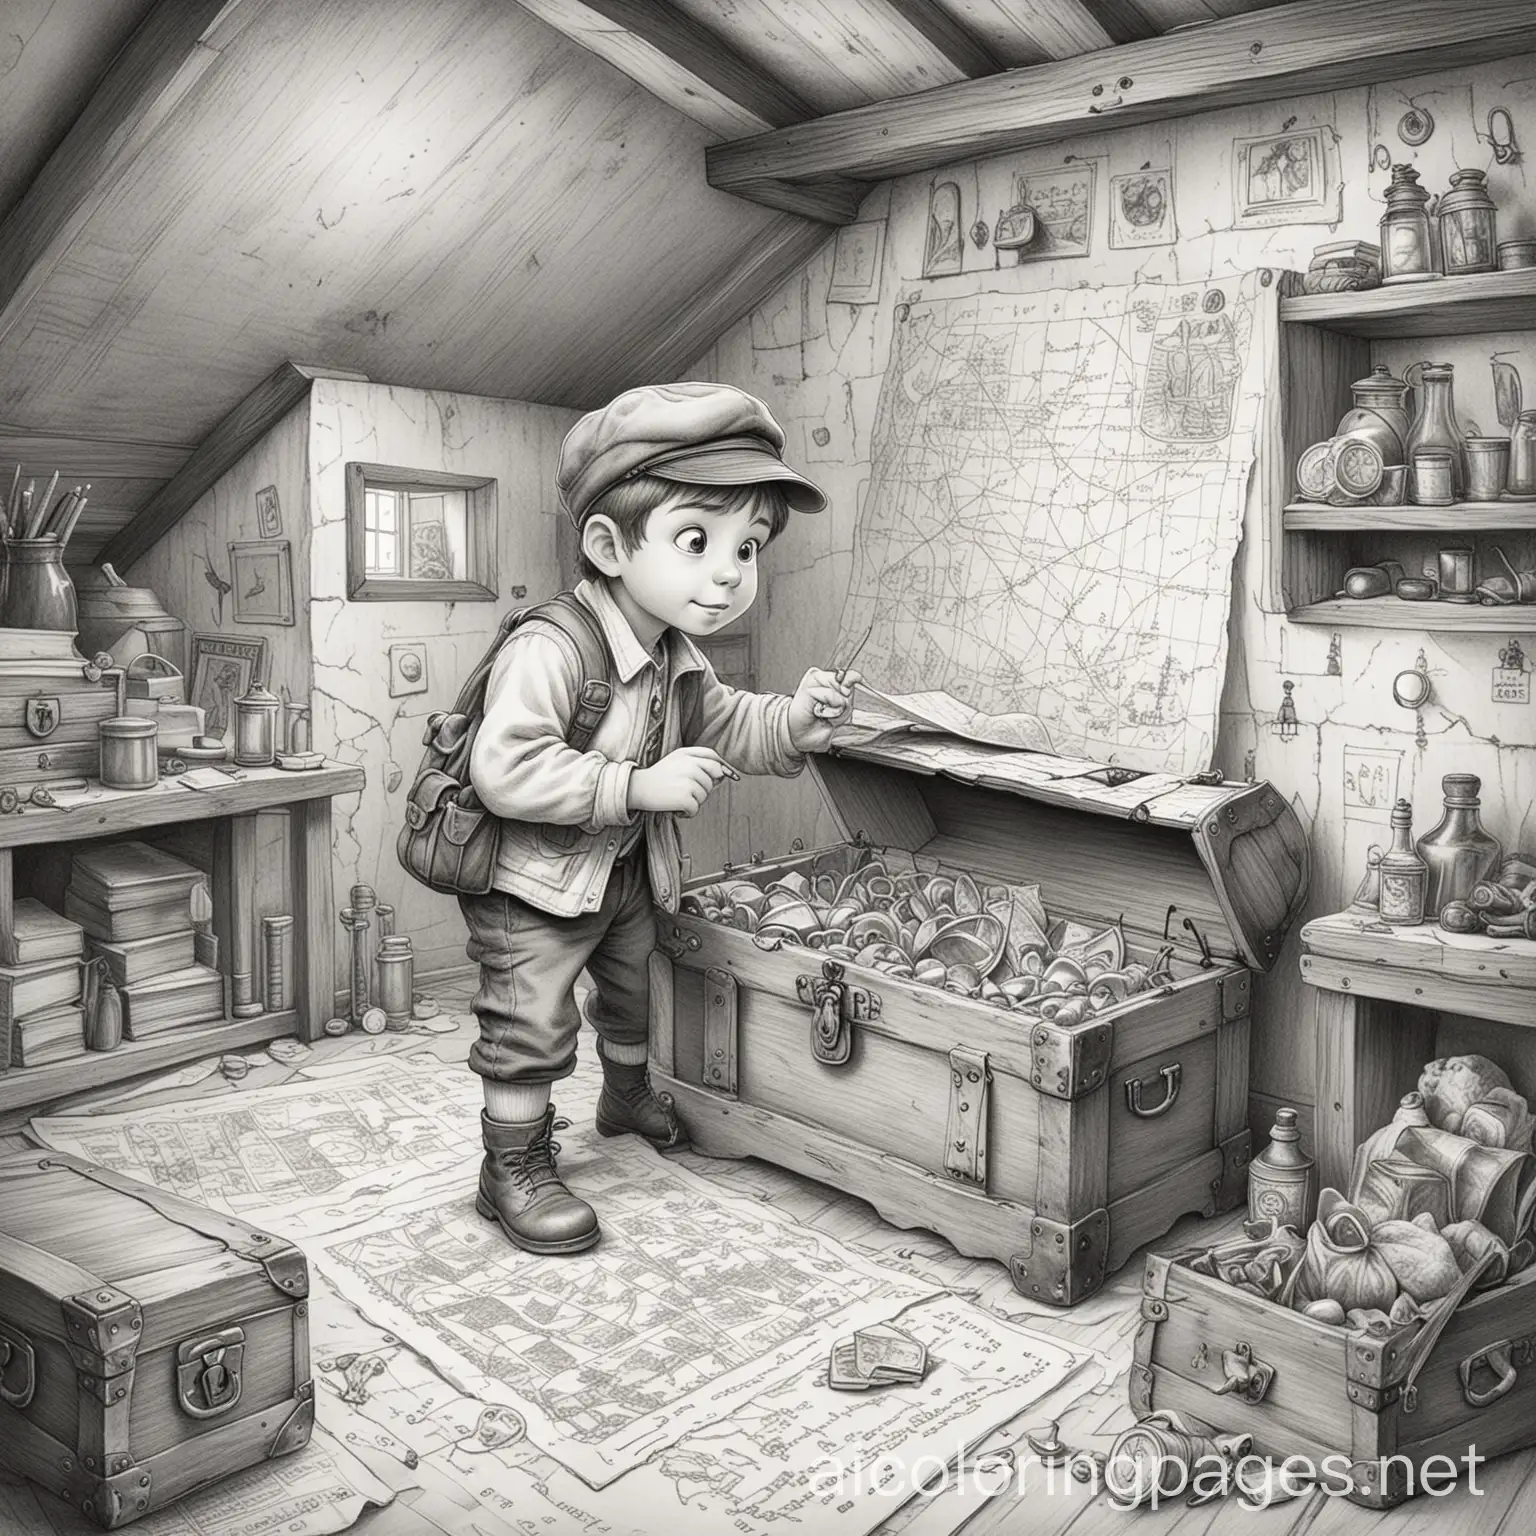 Lightly sketch the layout of the entire scene with a pencil. Place the main elements: the kid detective in the centre, the treasure map in their hands, the old chest in front of them, and the attic setting around them., Coloring Page, black and white, line art, white background, Simplicity, Ample White Space.